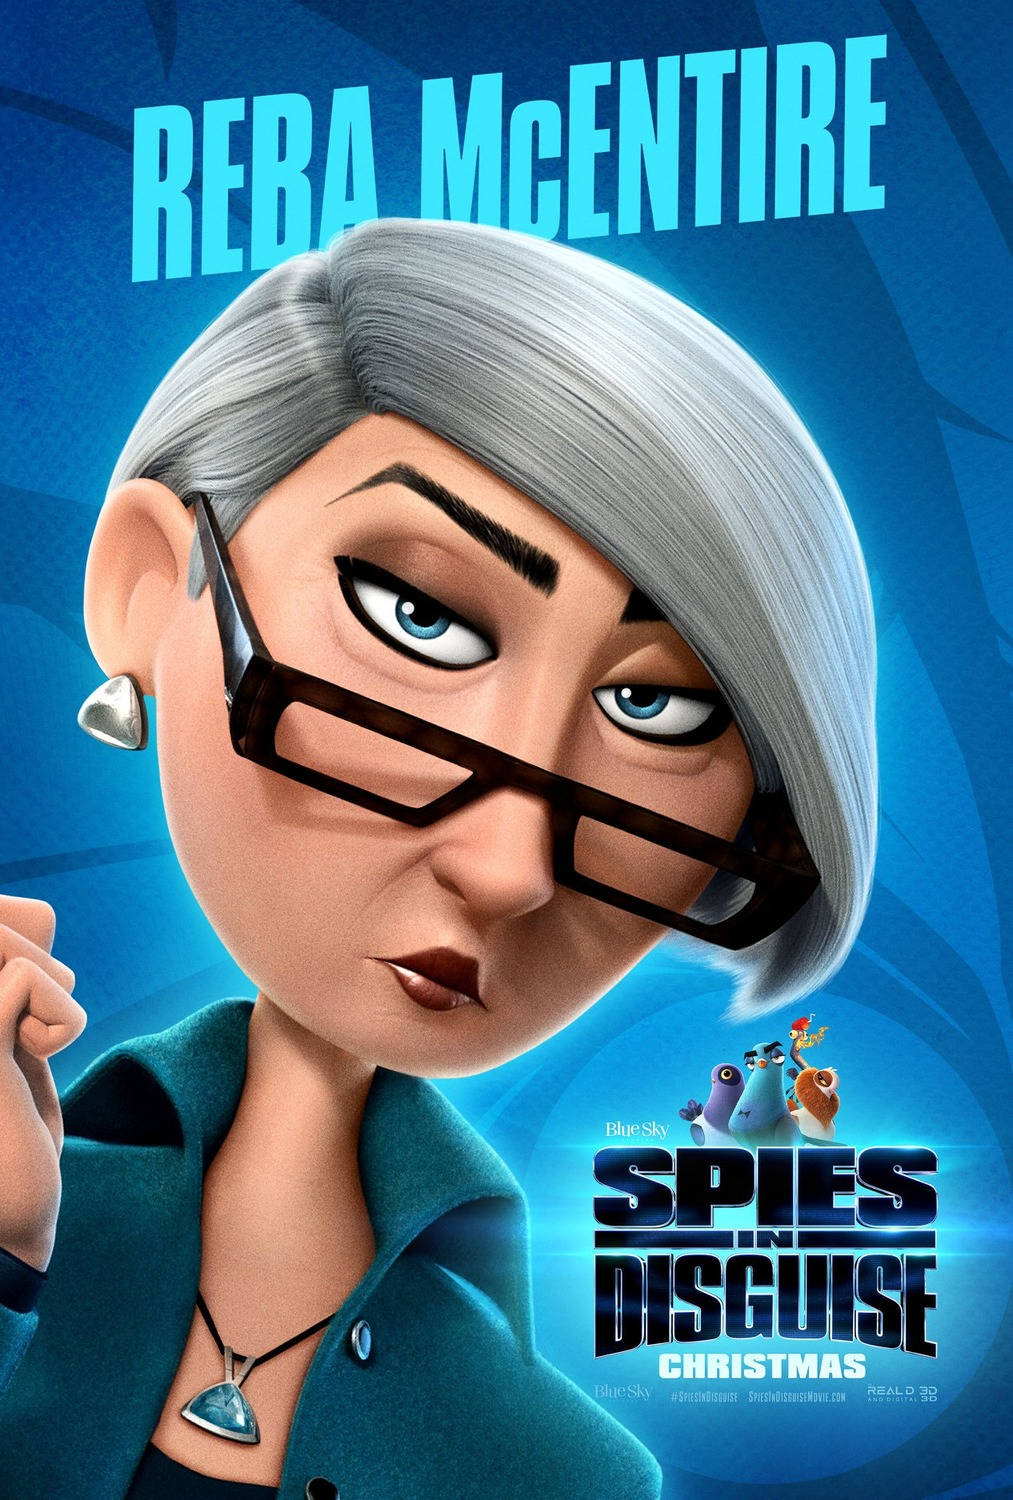 Joyjenkins Spies In Disguise Can Be Translated To Italian As 